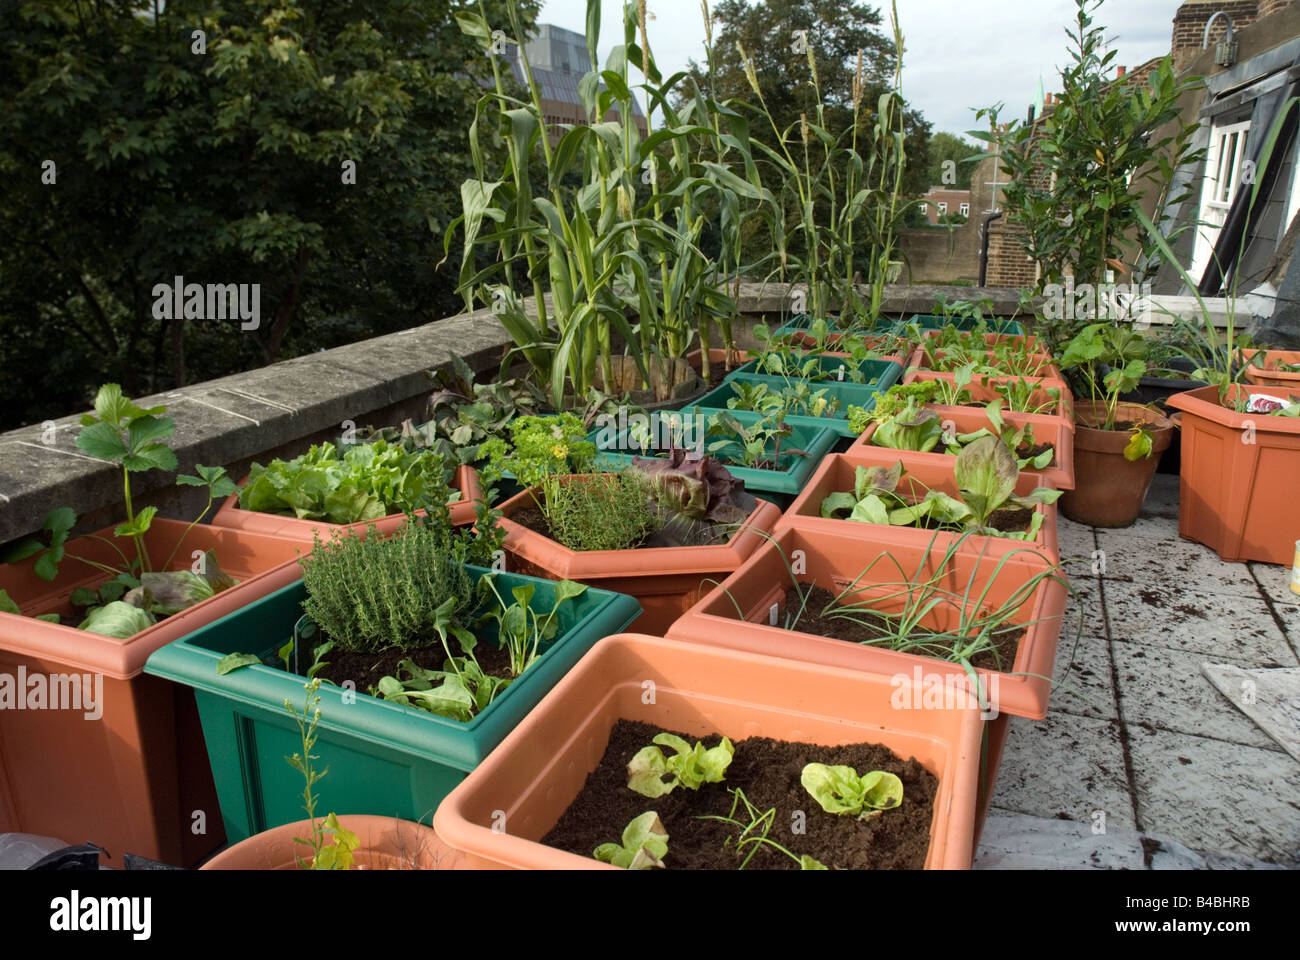 Vegetables and salads growing in plastic pots on rooftop urban vegetable  garden London Stock Photo - Alamy